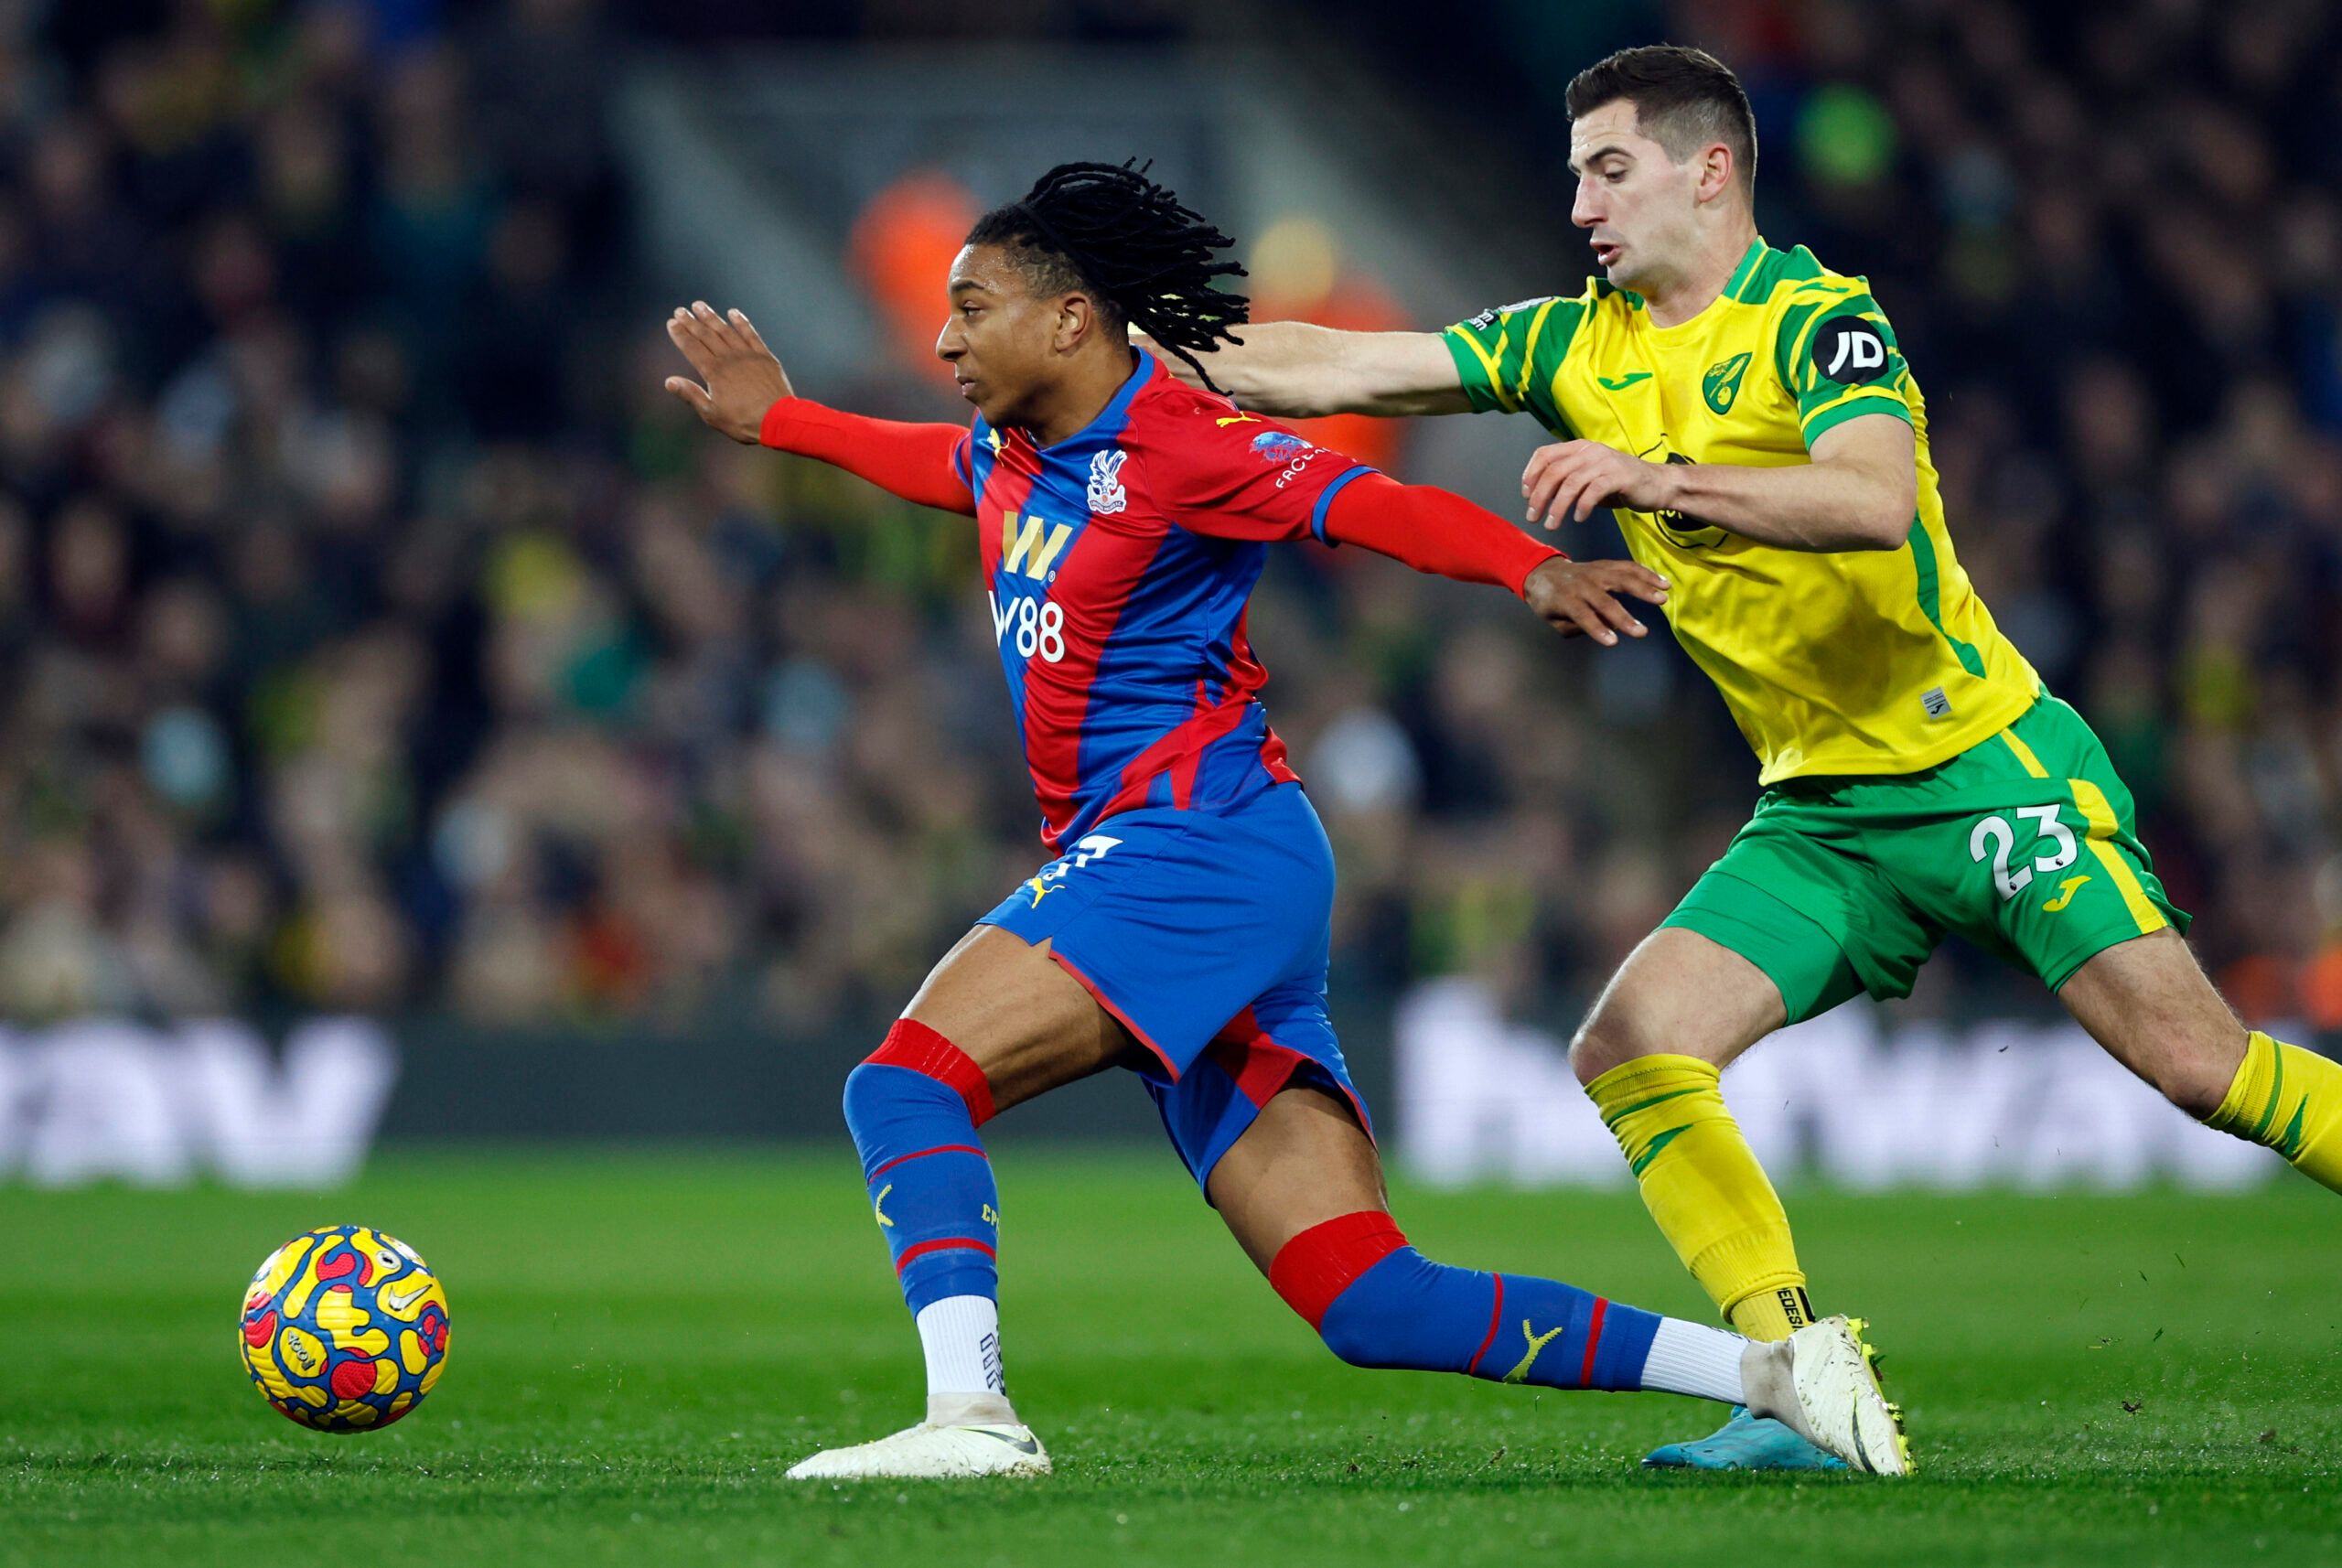 Soccer Football - Premier League - Norwich City v Crystal Palace - Carrow Road, Norwich, Britain - February 9, 2022 Crystal Palace's Michael Olise in action with Norwich City's Kenny McLean Action Images via Reuters/John Sibley EDITORIAL USE ONLY. No use with unauthorized audio, video, data, fixture lists, club/league logos or 'live' services. Online in-match use limited to 75 images, no video emulation. No use in betting, games or single club /league/player publications.  Please contact your ac